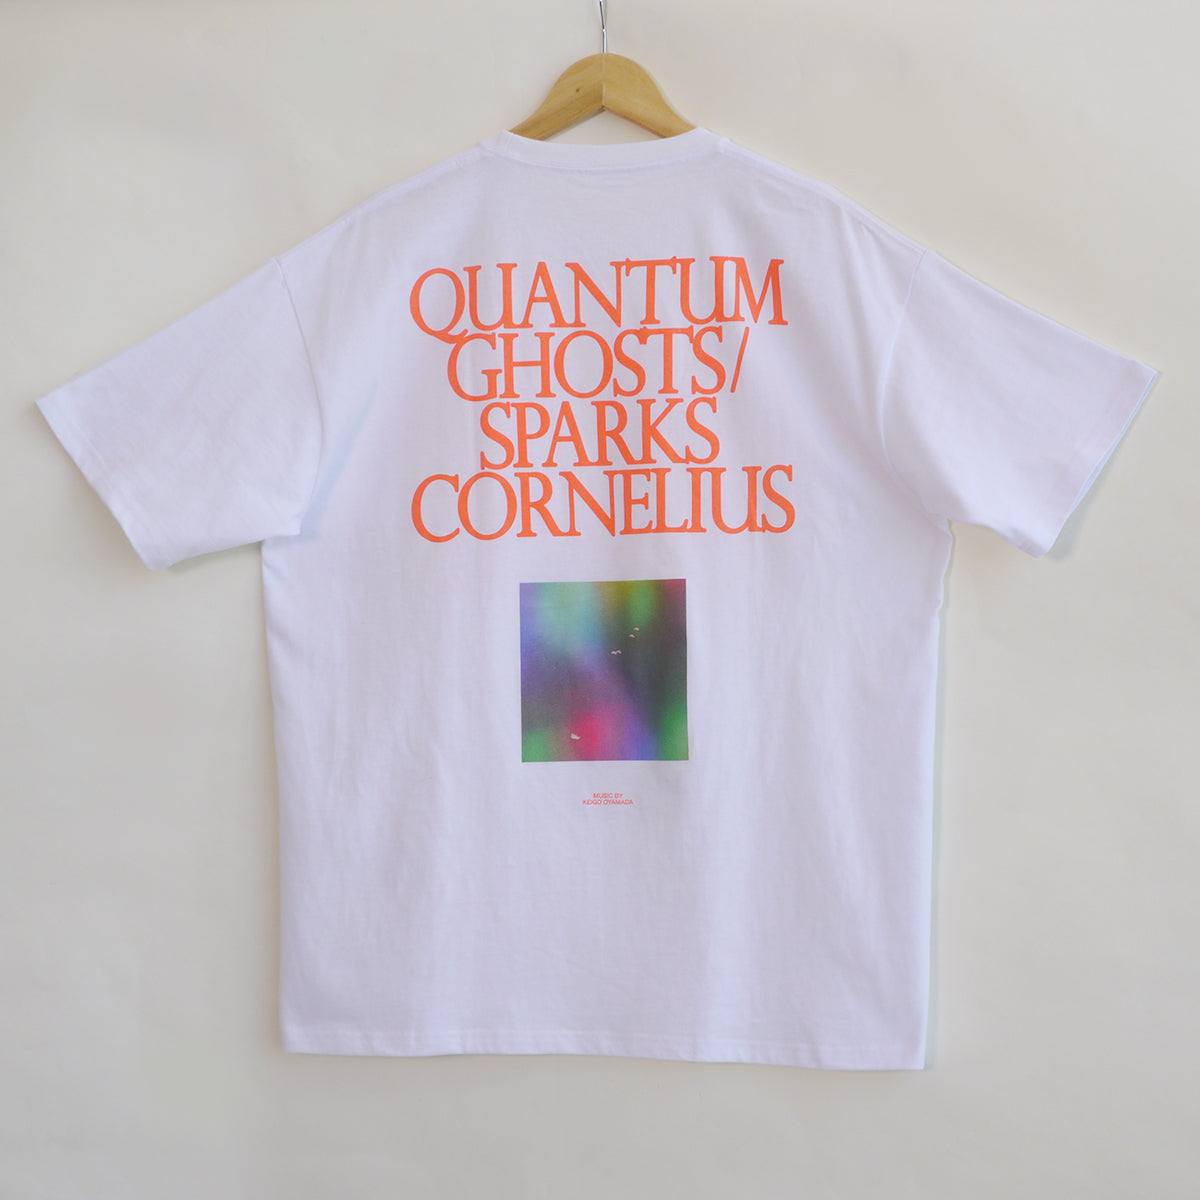 Sparks / Quantum Ghosts T-Shirt 白